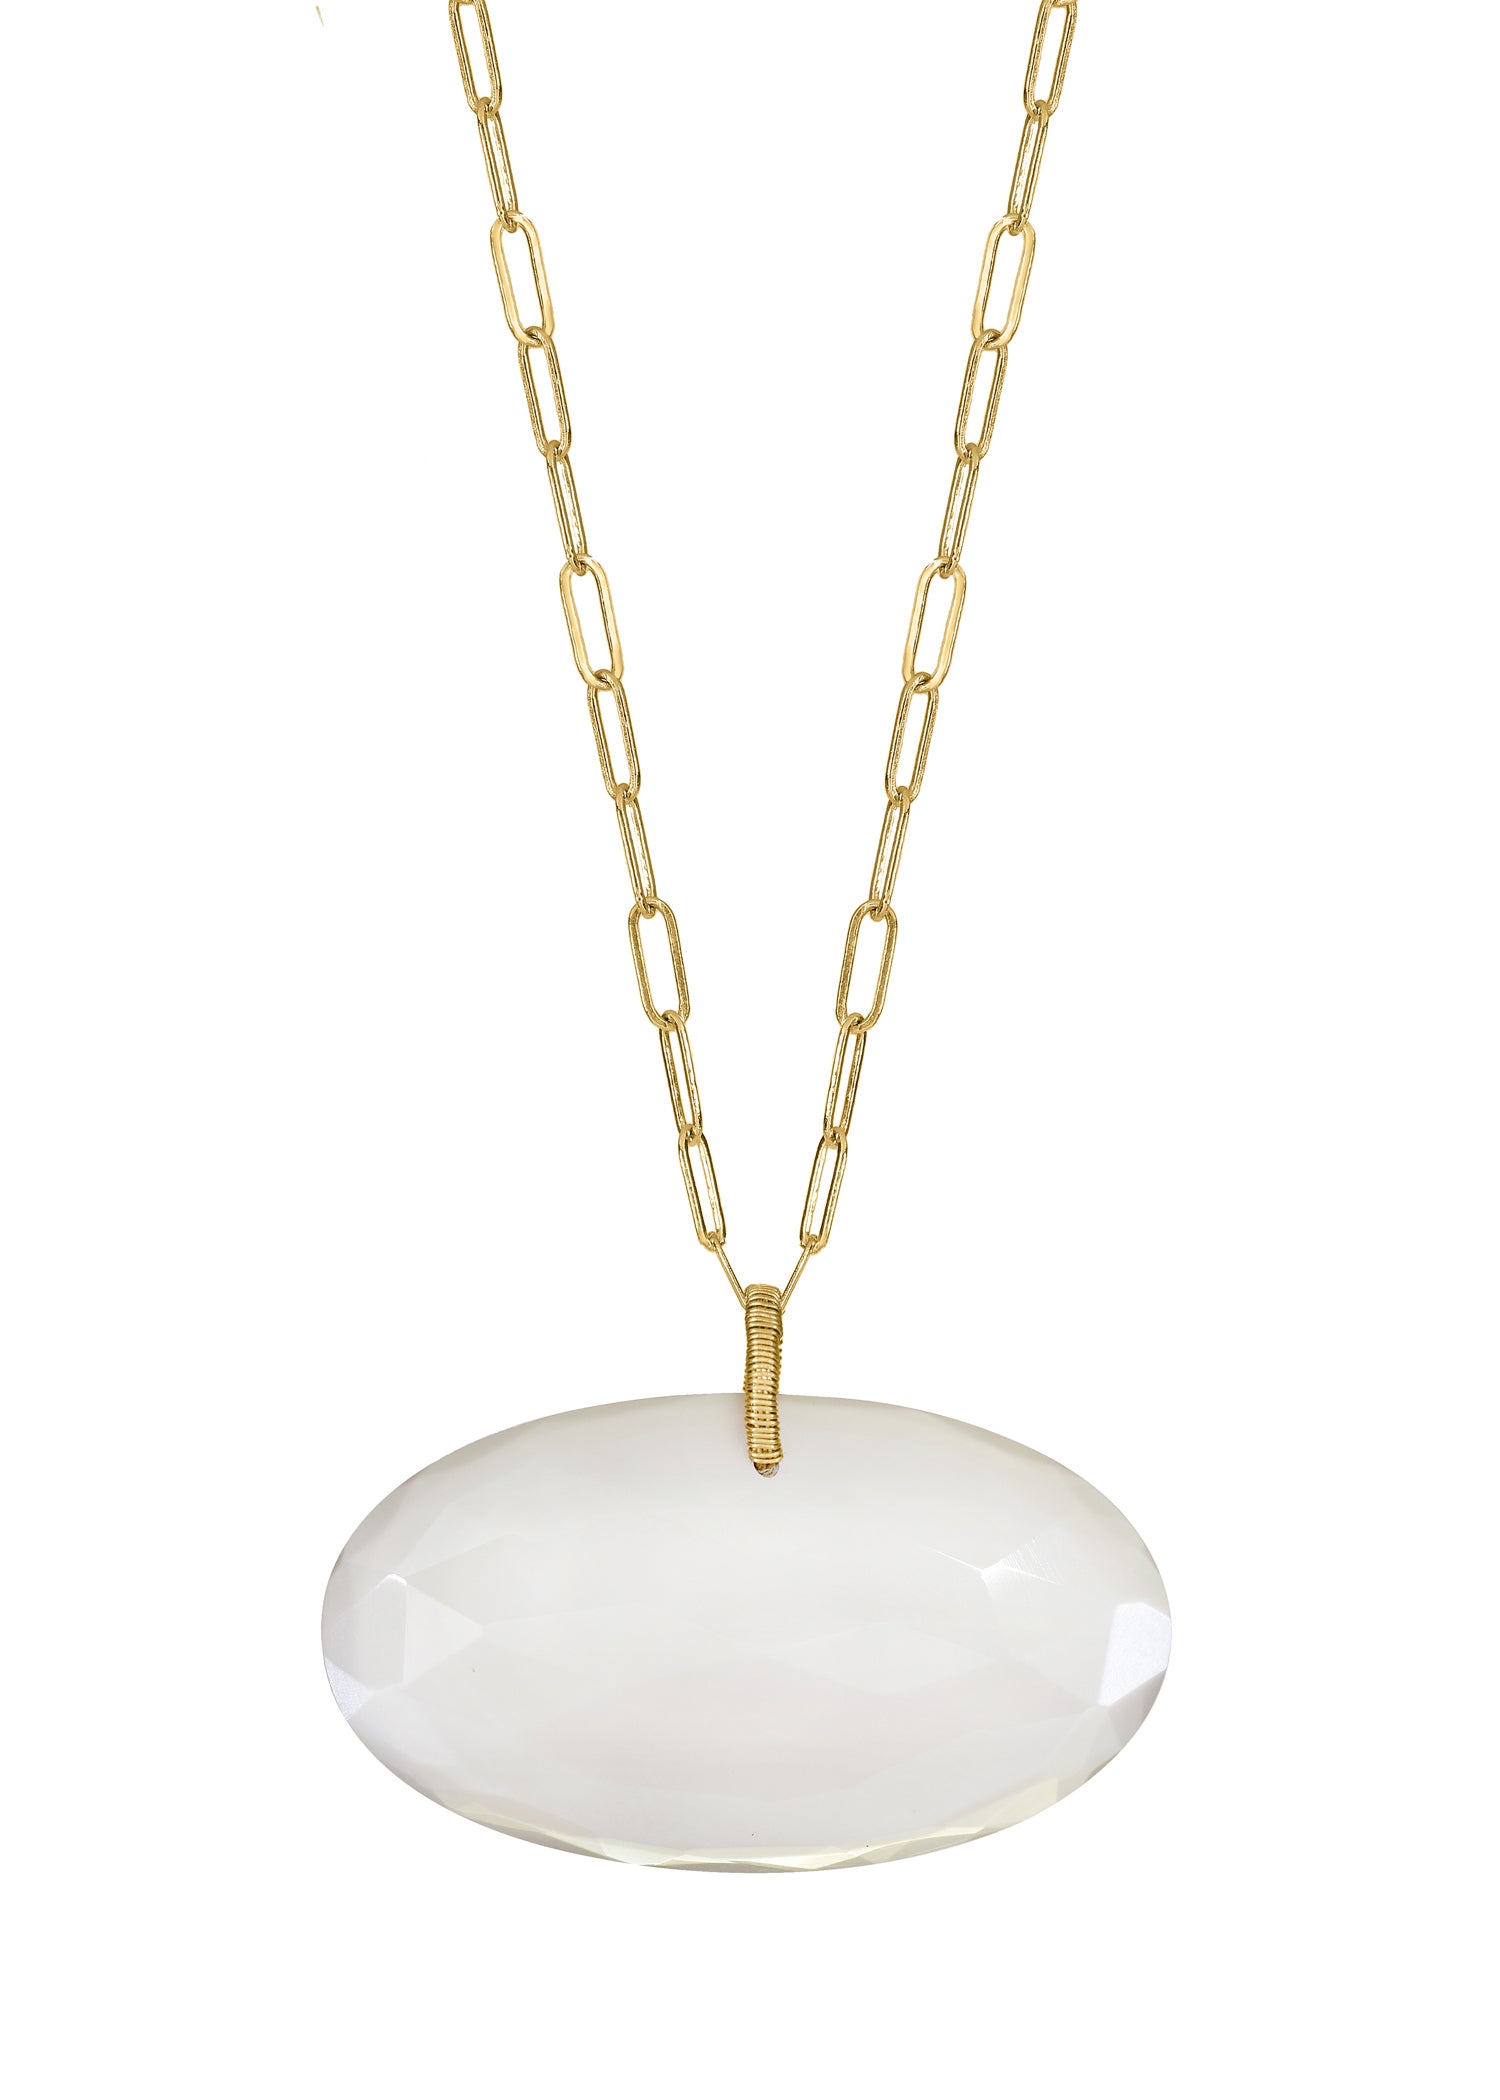 Gray moonstone 14k gold Necklace measures 17" in length Pendant measures 7/8" in length and 1 1/2" in width Handmade in our Los Angeles studio